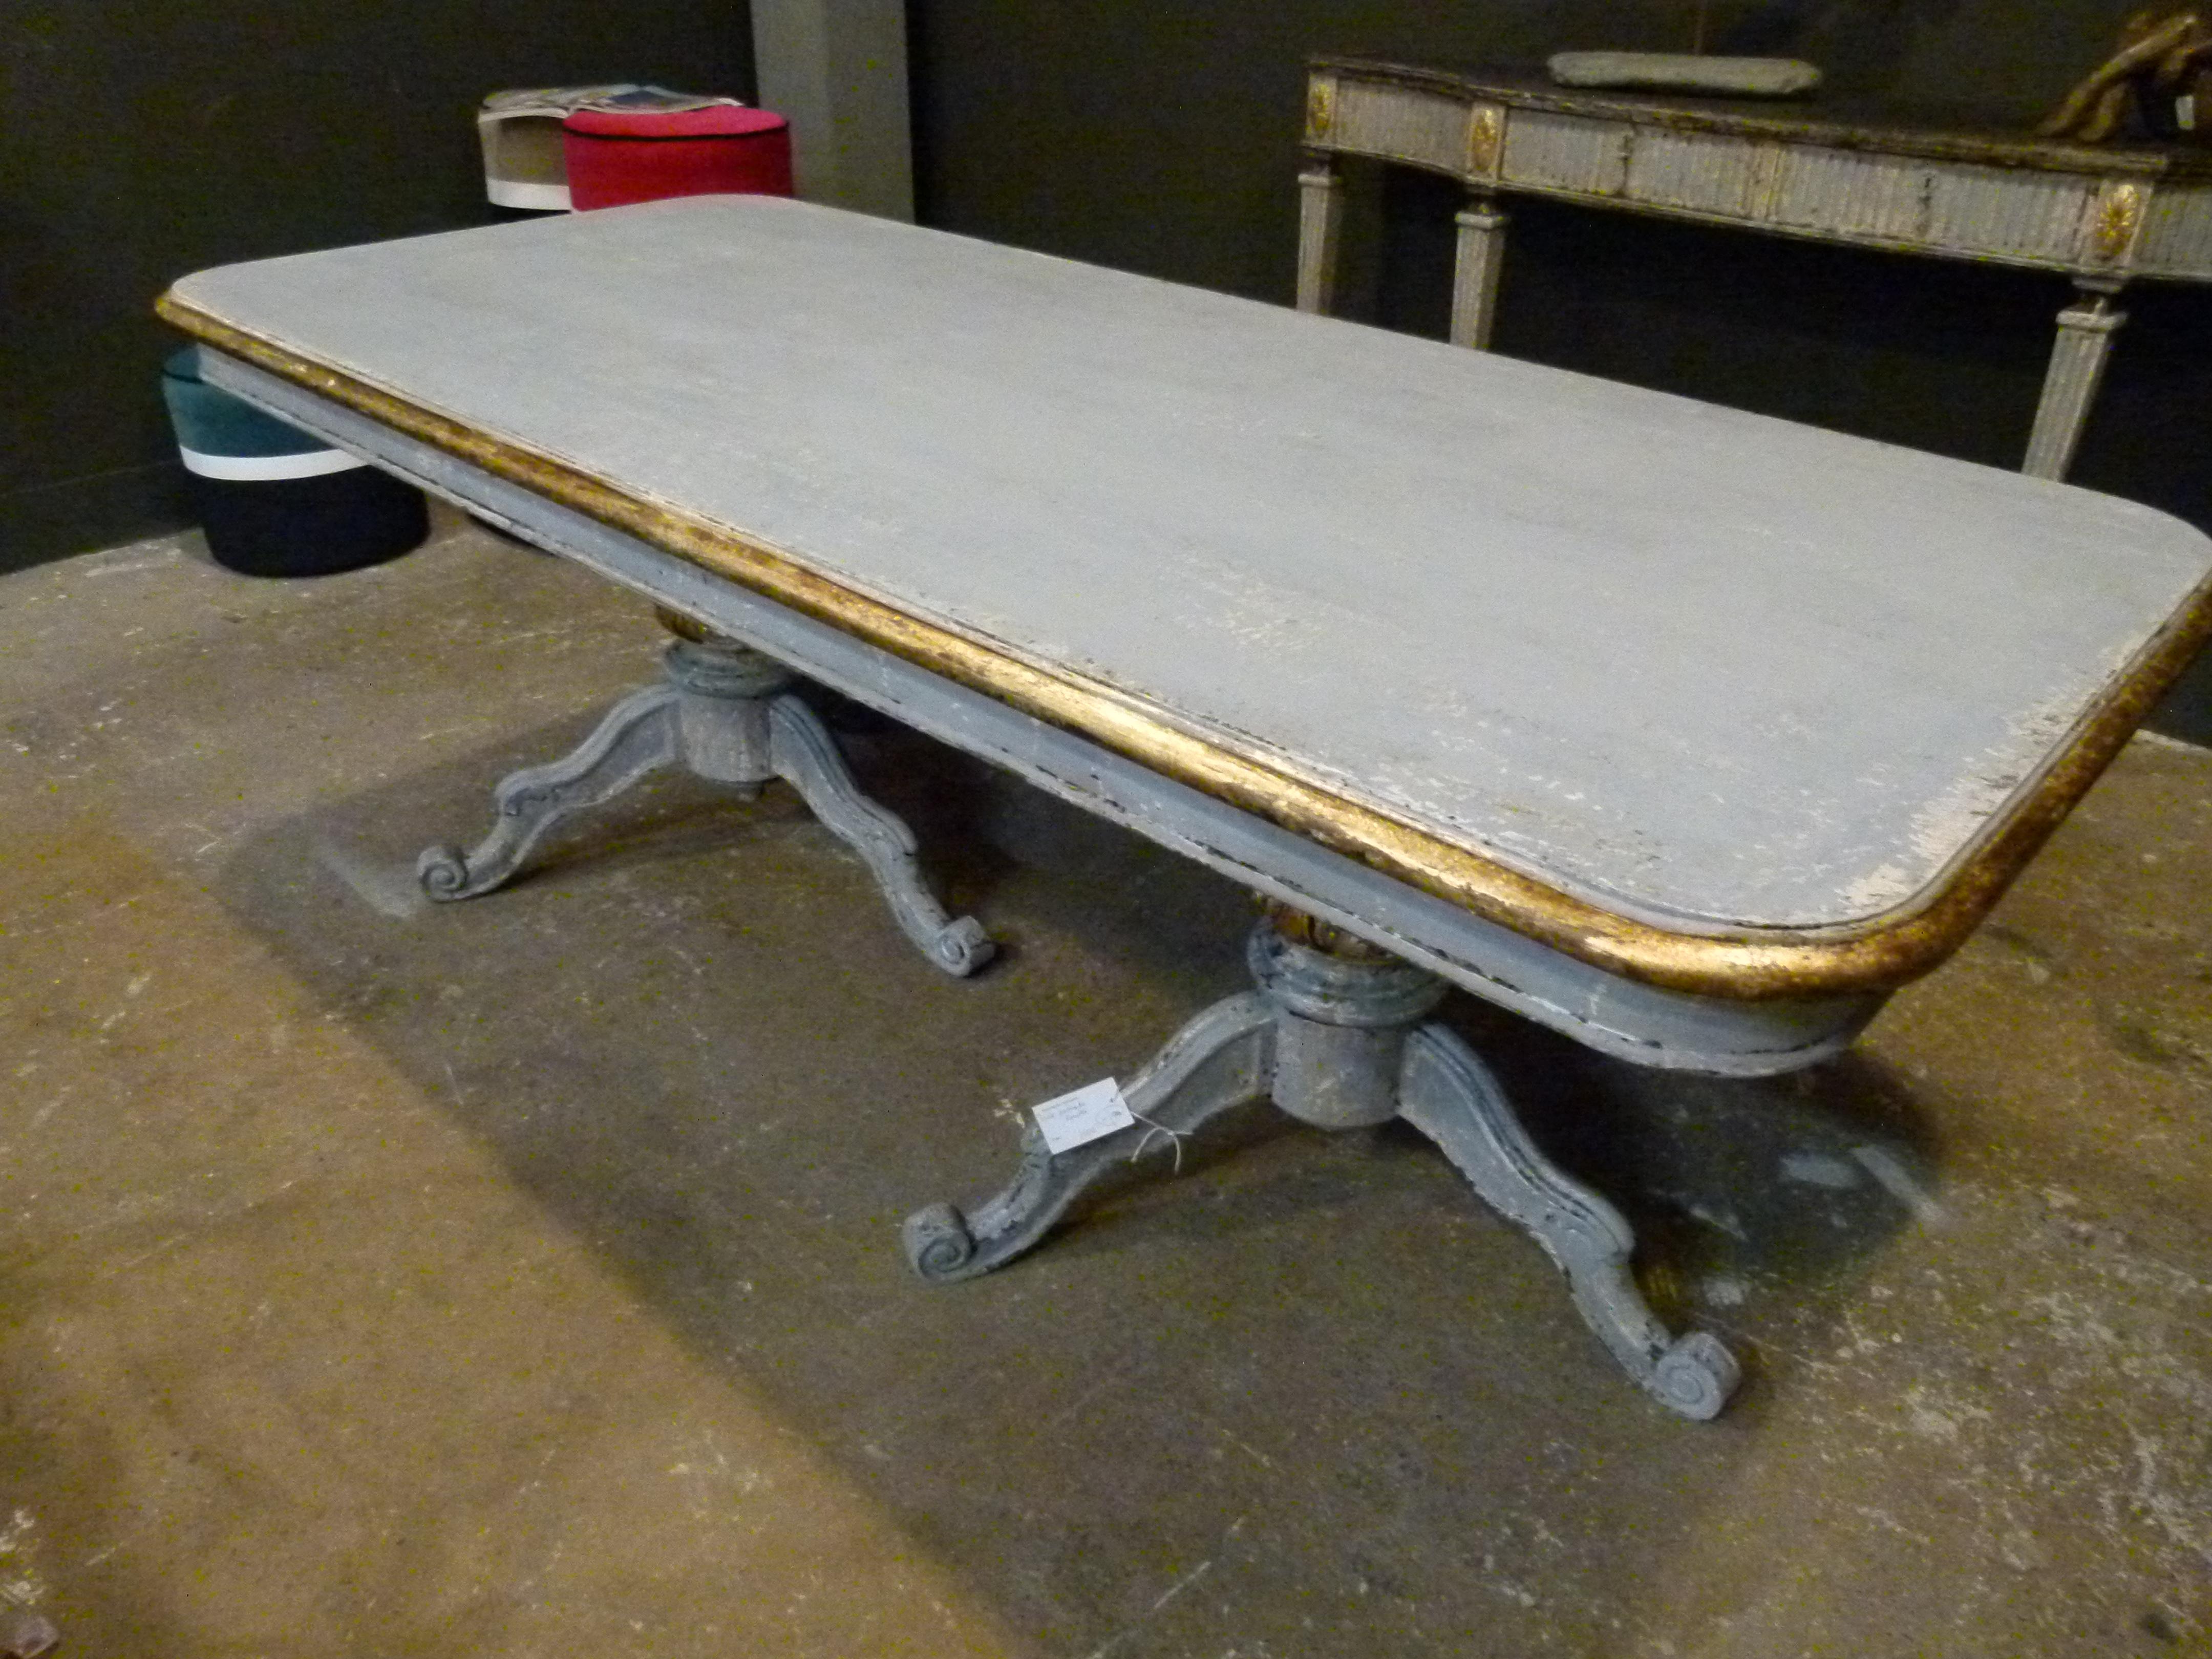 Hand-Painted 19th Century French Table with Grey Color Patina